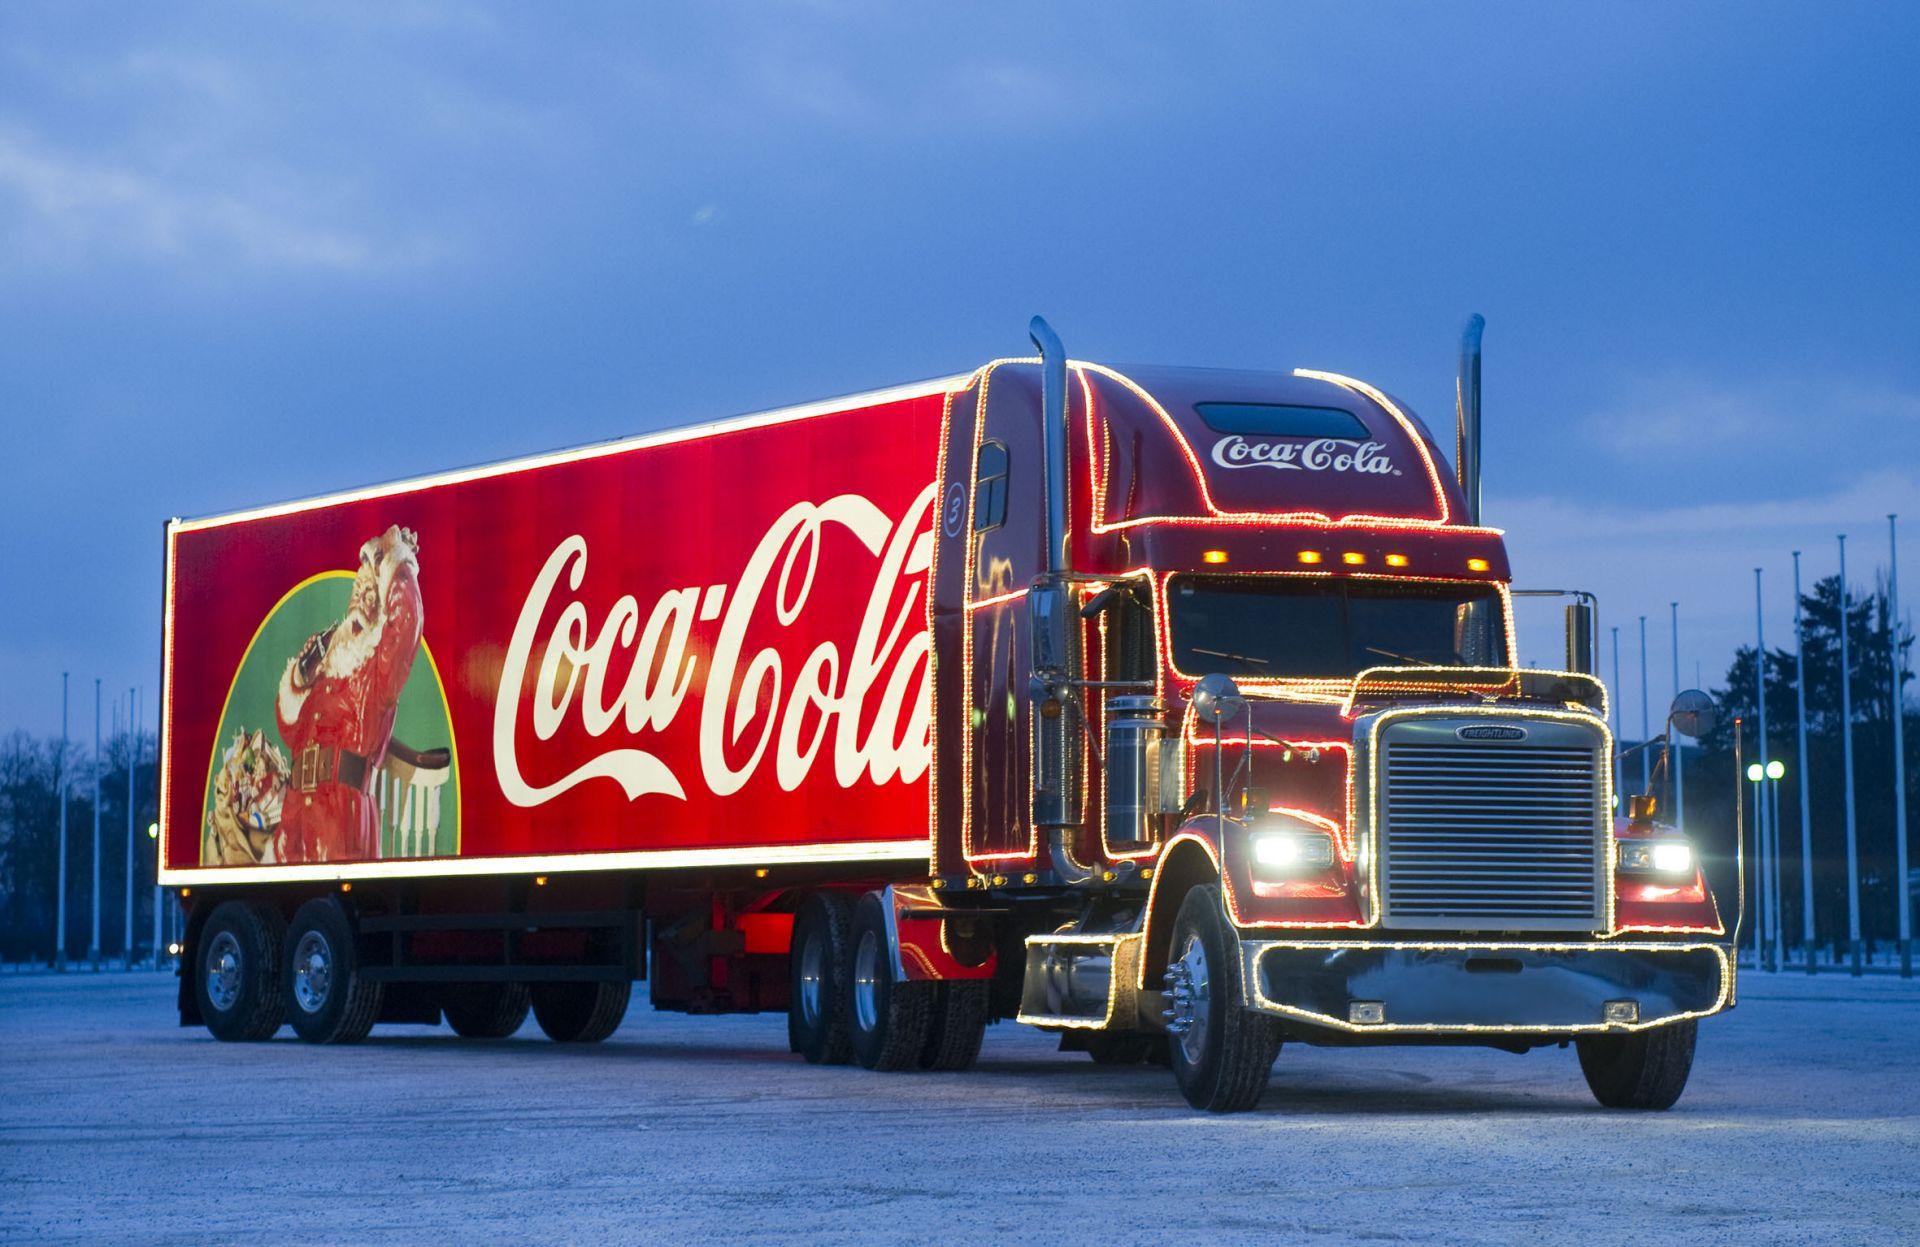 Wallpaper Coca Cola Christmas Truck Cocacola Christmas Day Cola Truck  Background  Download Free Image